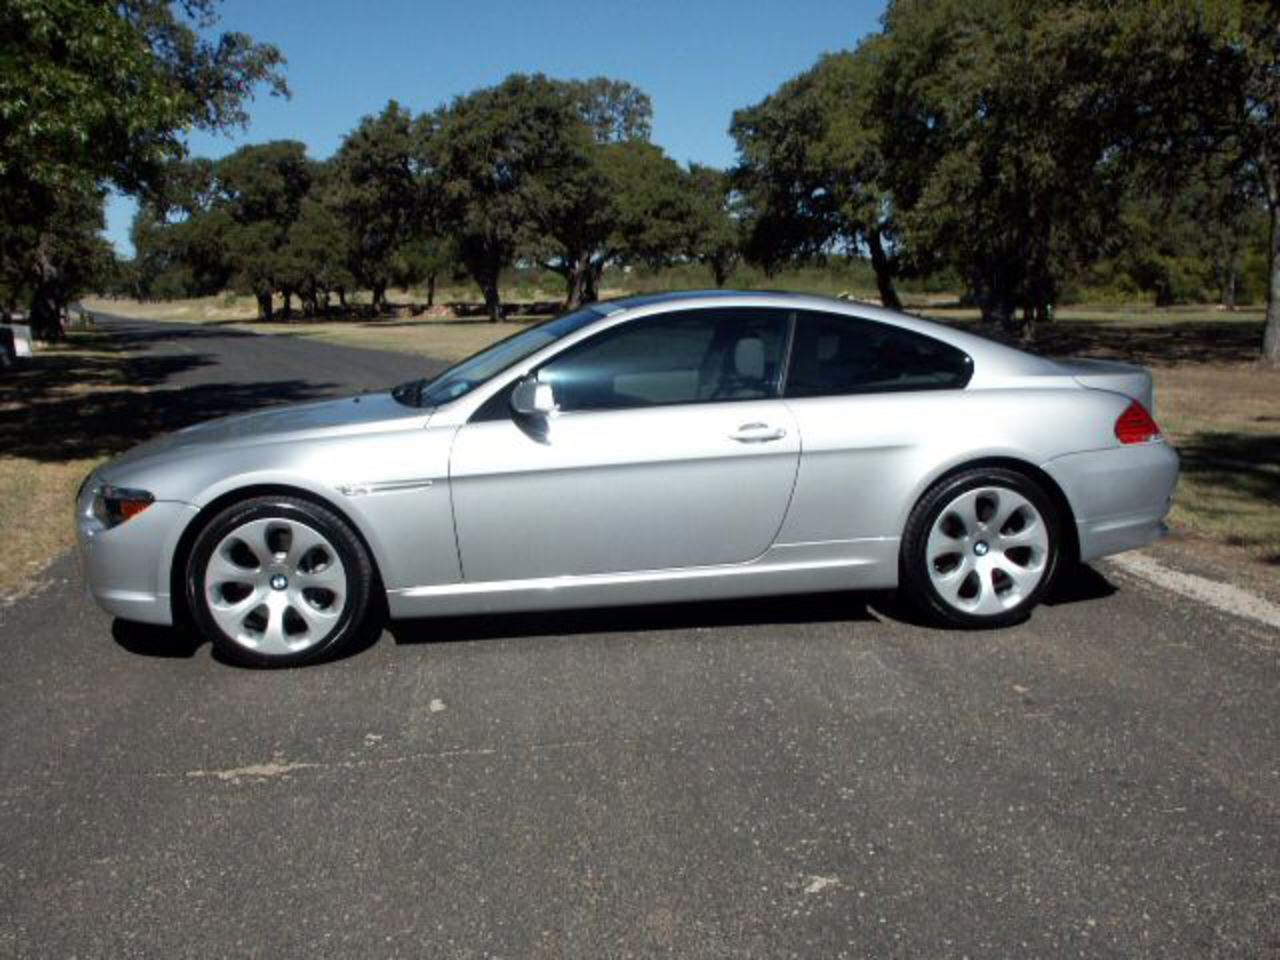 The 2005 BMW 6 Series is manufactured by BMW. It was introduced in 2005.